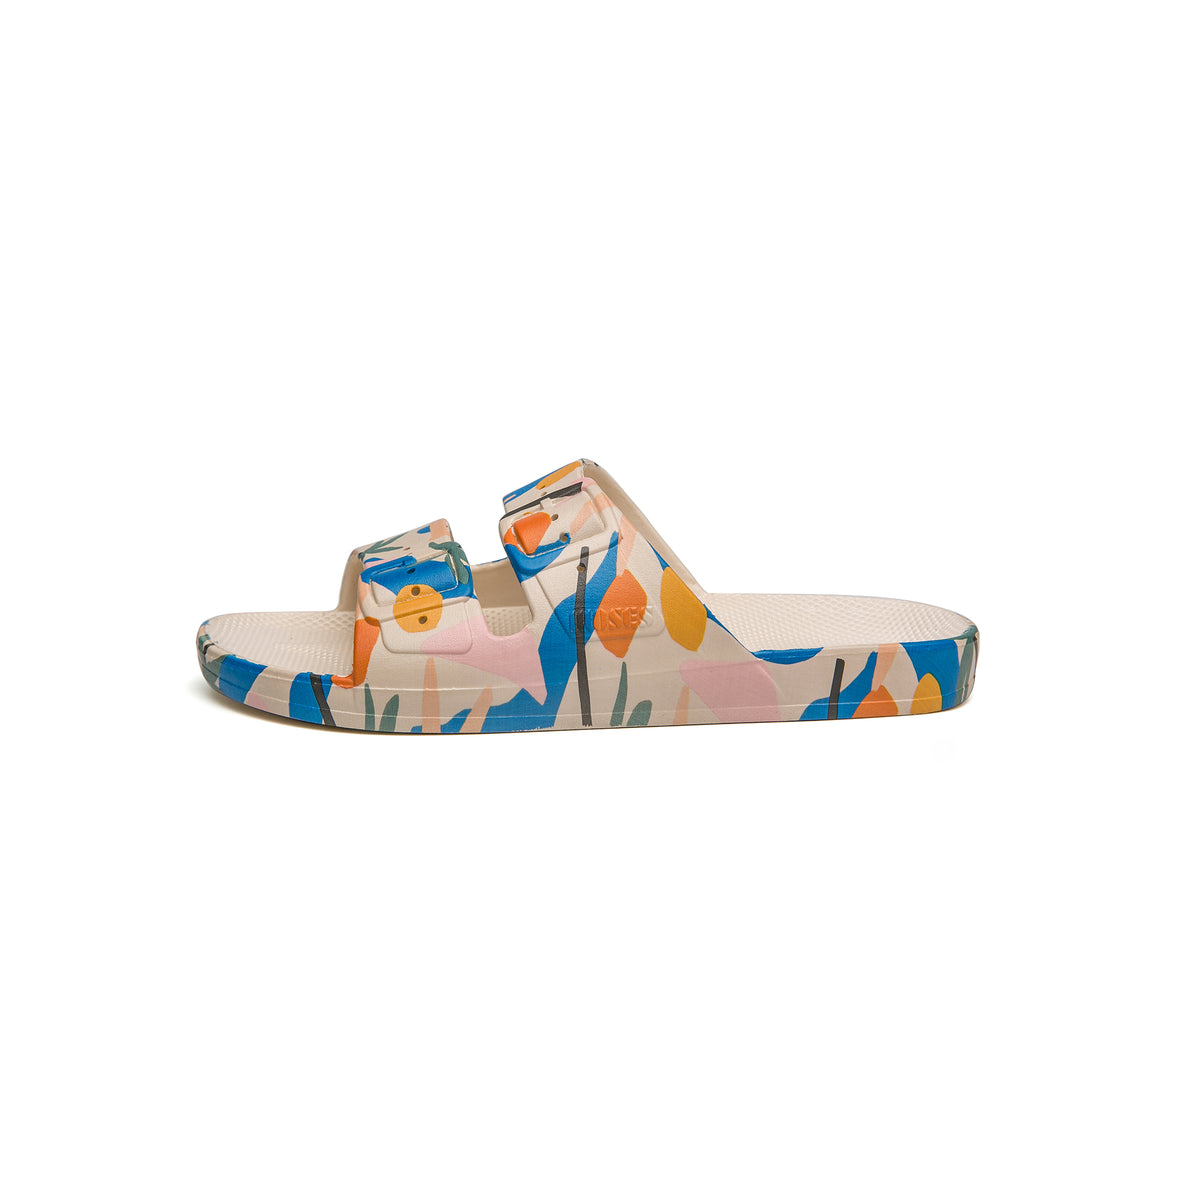 Parallel Culture Shoes and Fashion Online SLIDES FREEDOM MOSES FREEDOM MOSES PRINTS PALMETTO